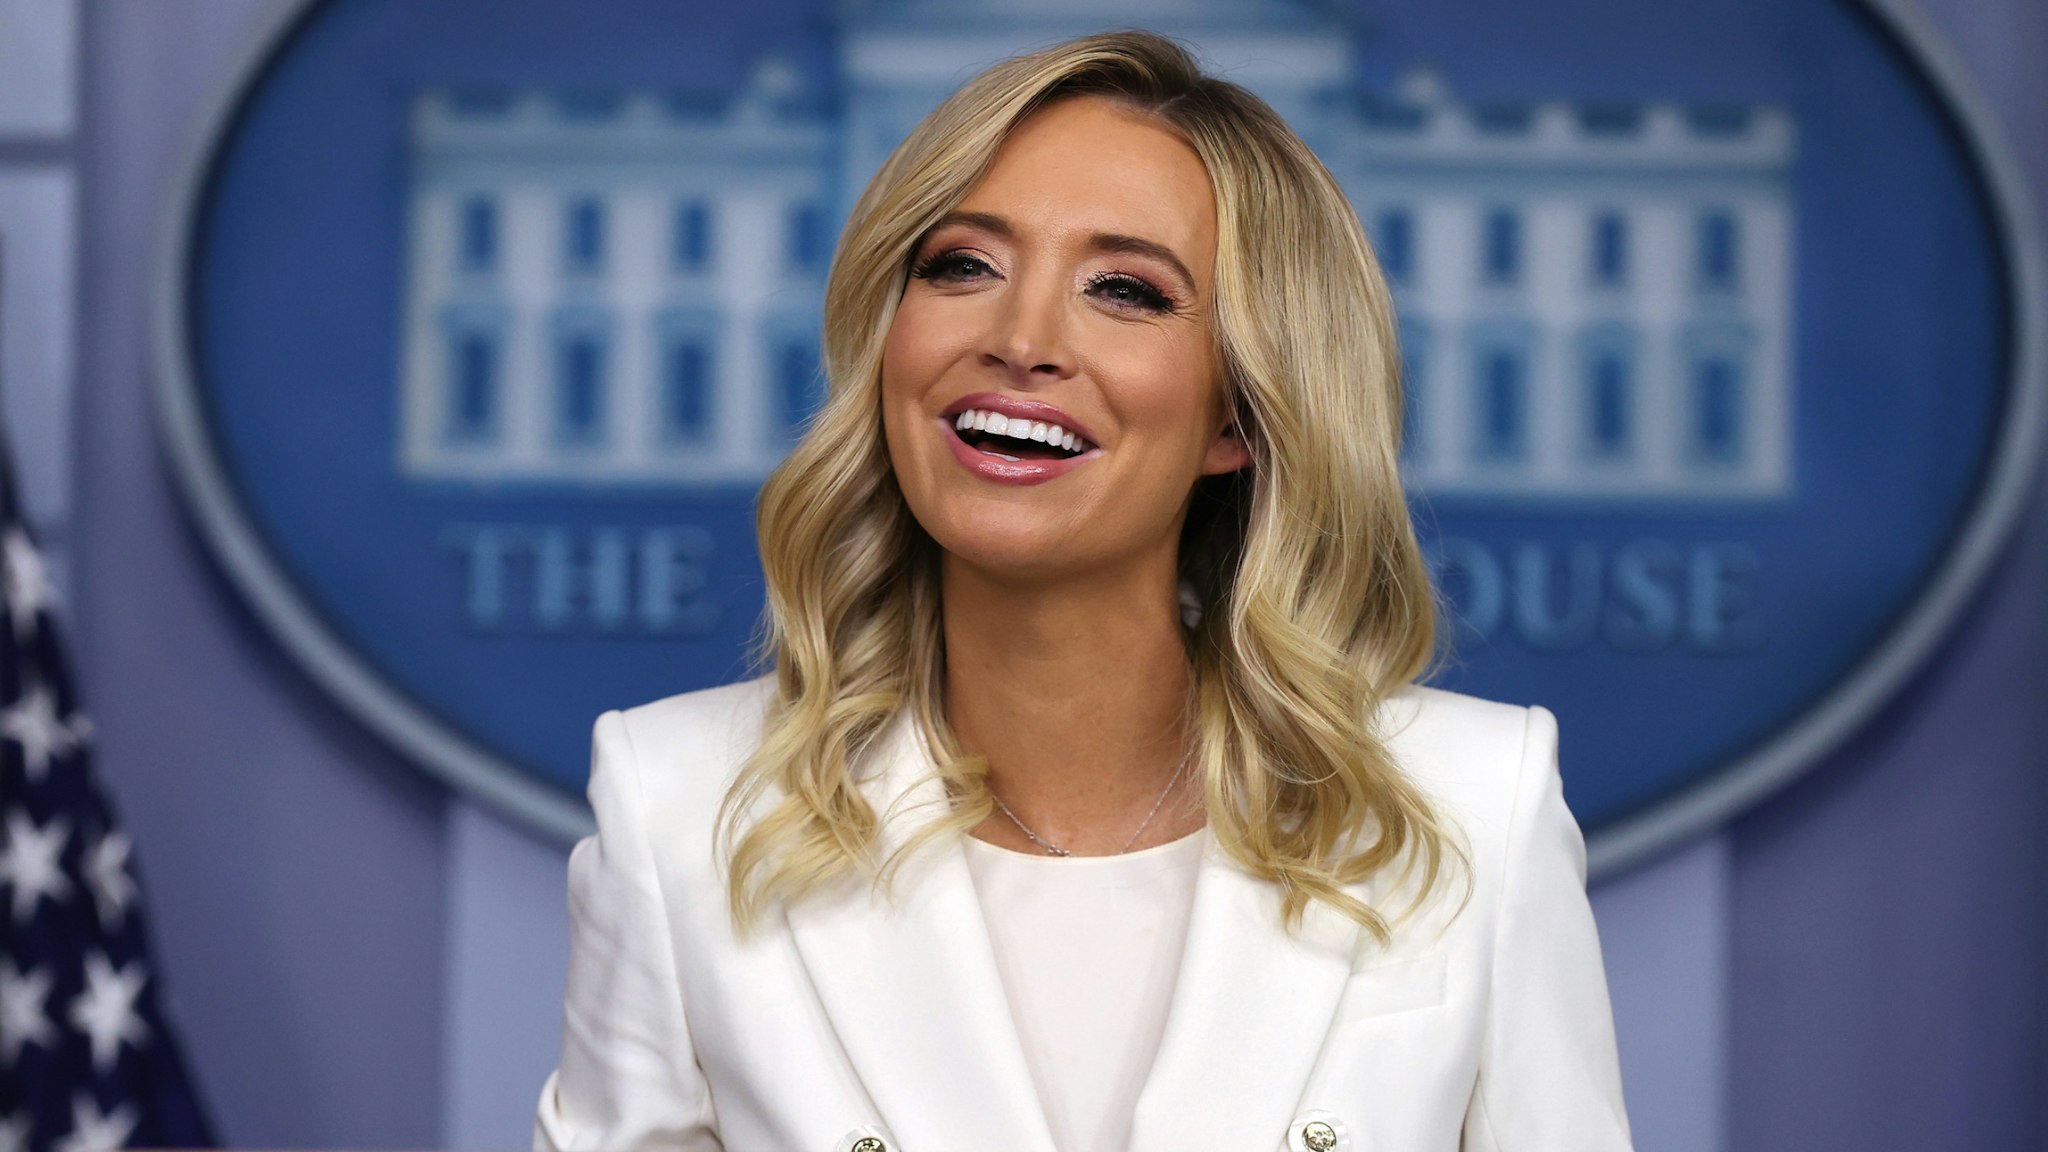 White House Press Secretary Kayleigh McEnany answers reporters' questions during a news conference in the Brady Press Briefing Room at the White House May 06, 2020 in Washington, DC.